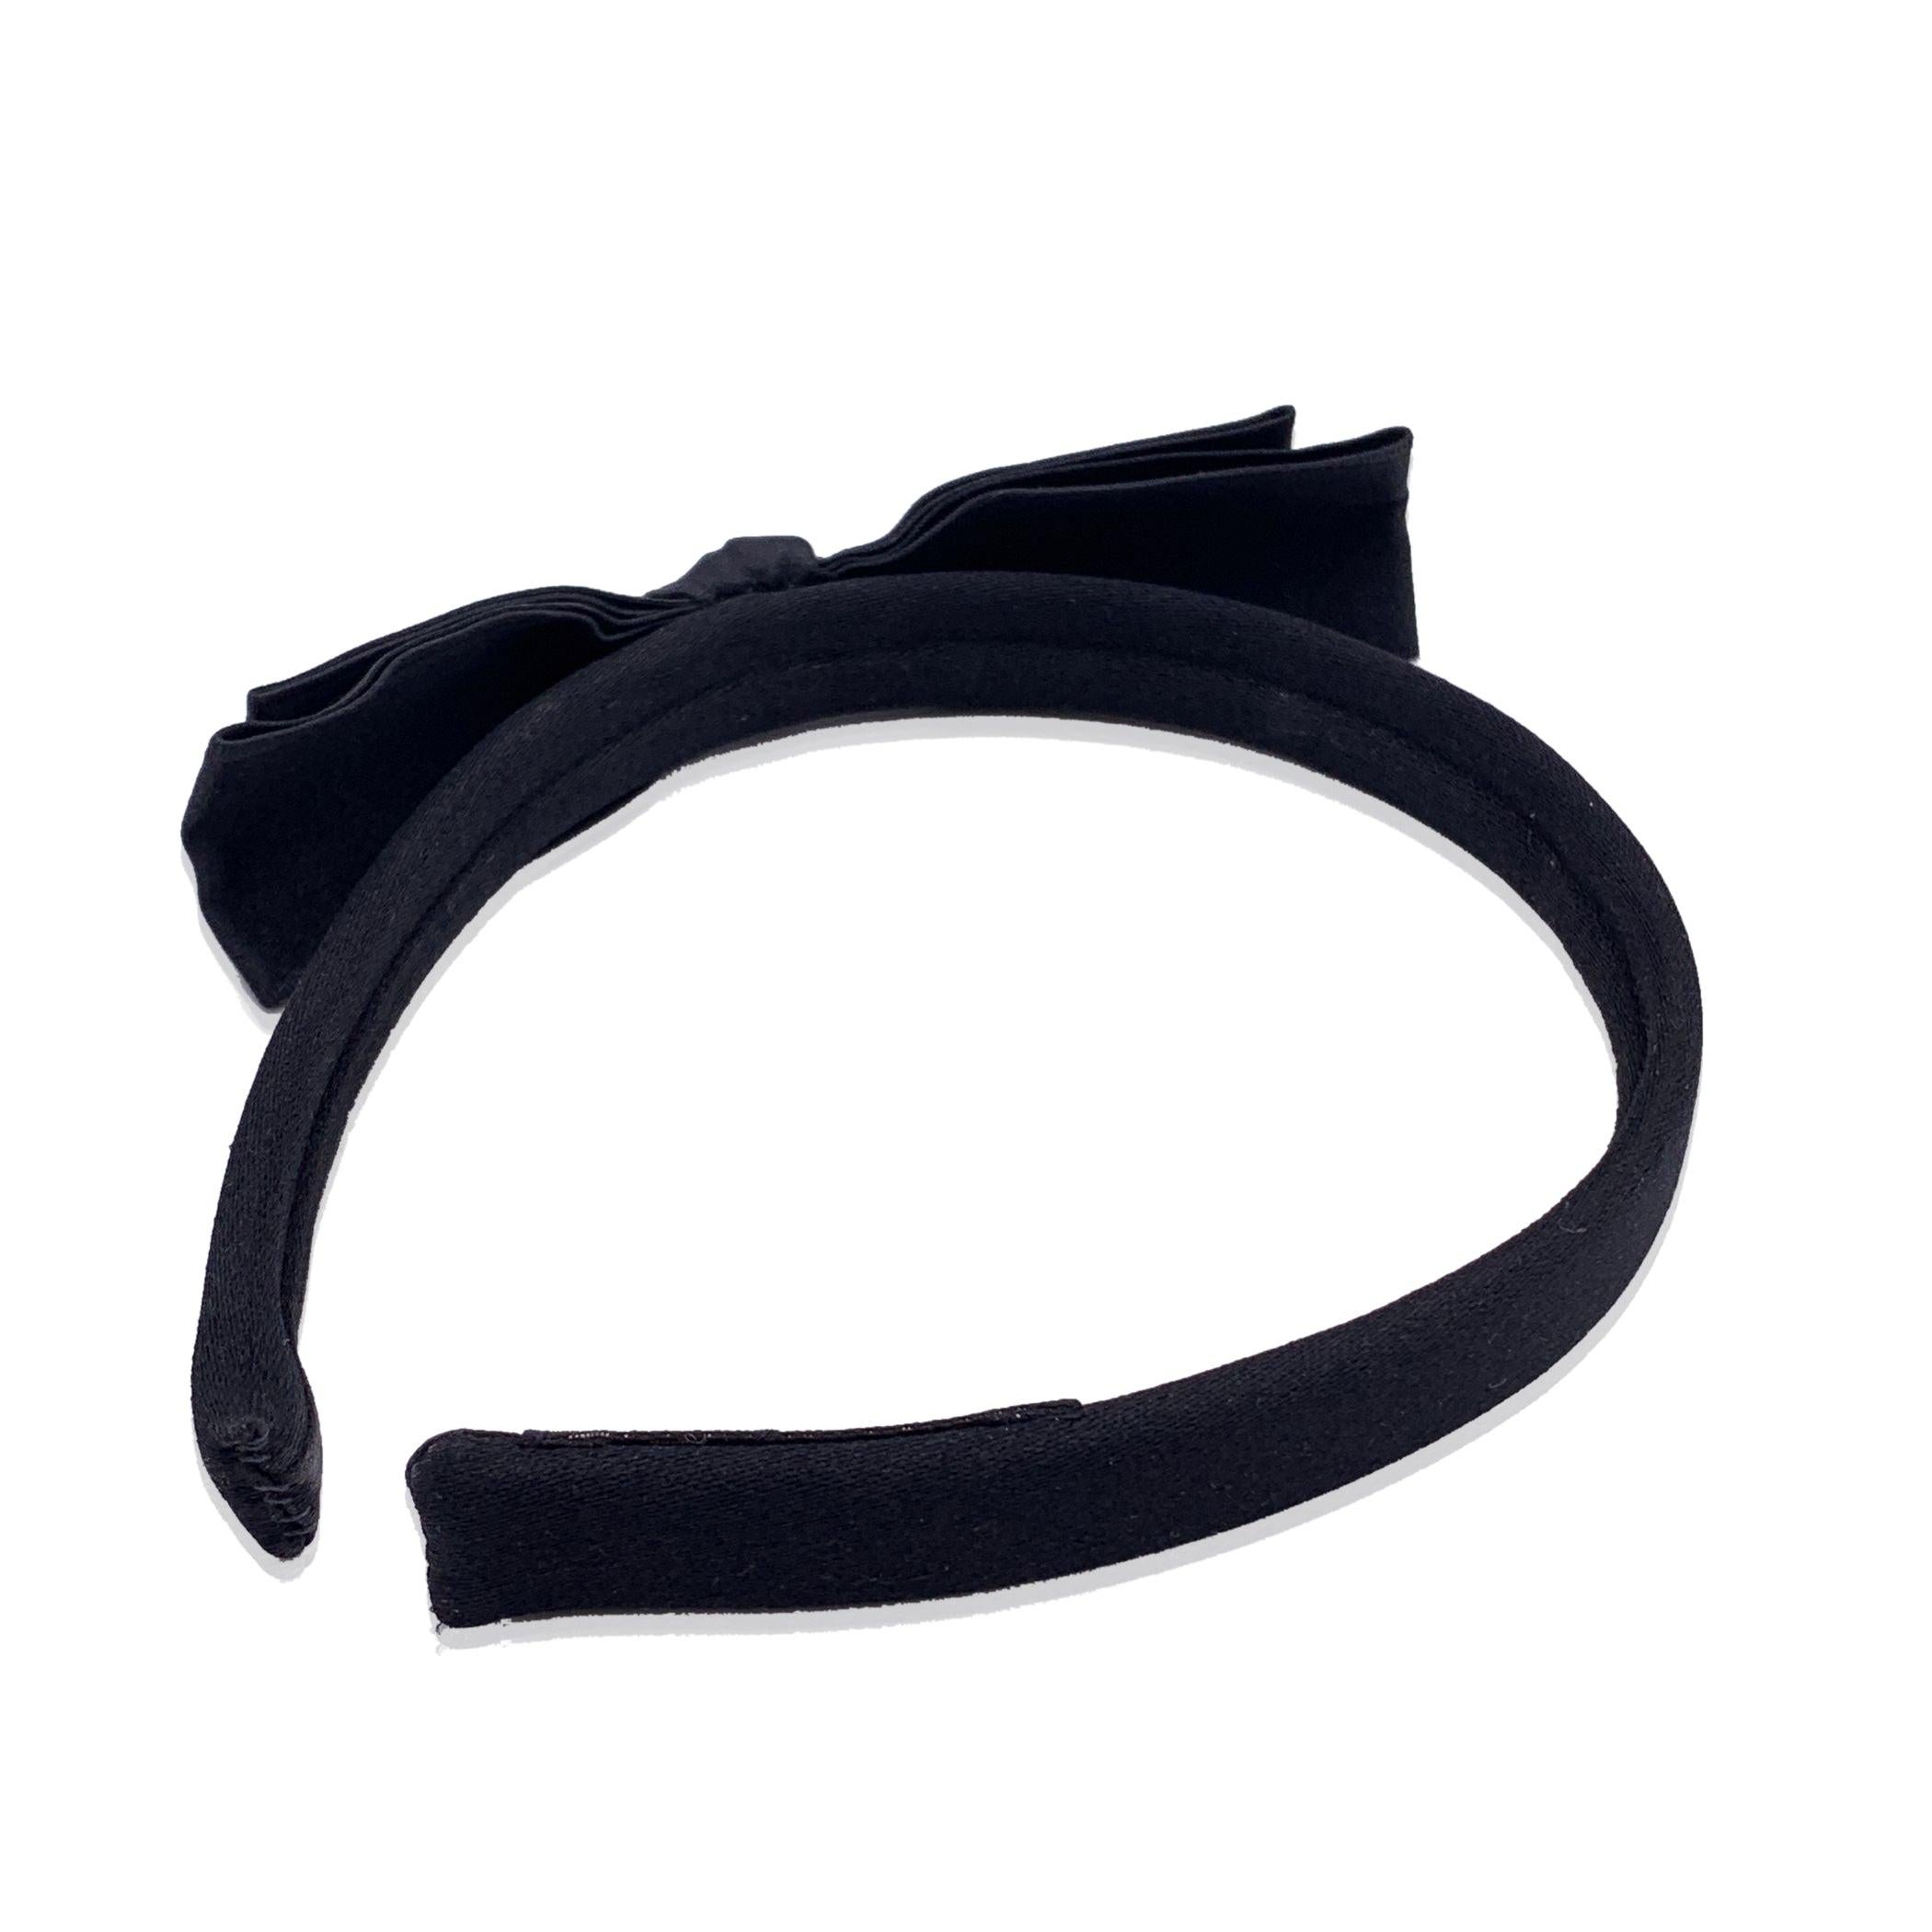 Chanel Vintage Black Silk Satin Headband Hair Accessory with Bow In Excellent Condition For Sale In Rome, Rome